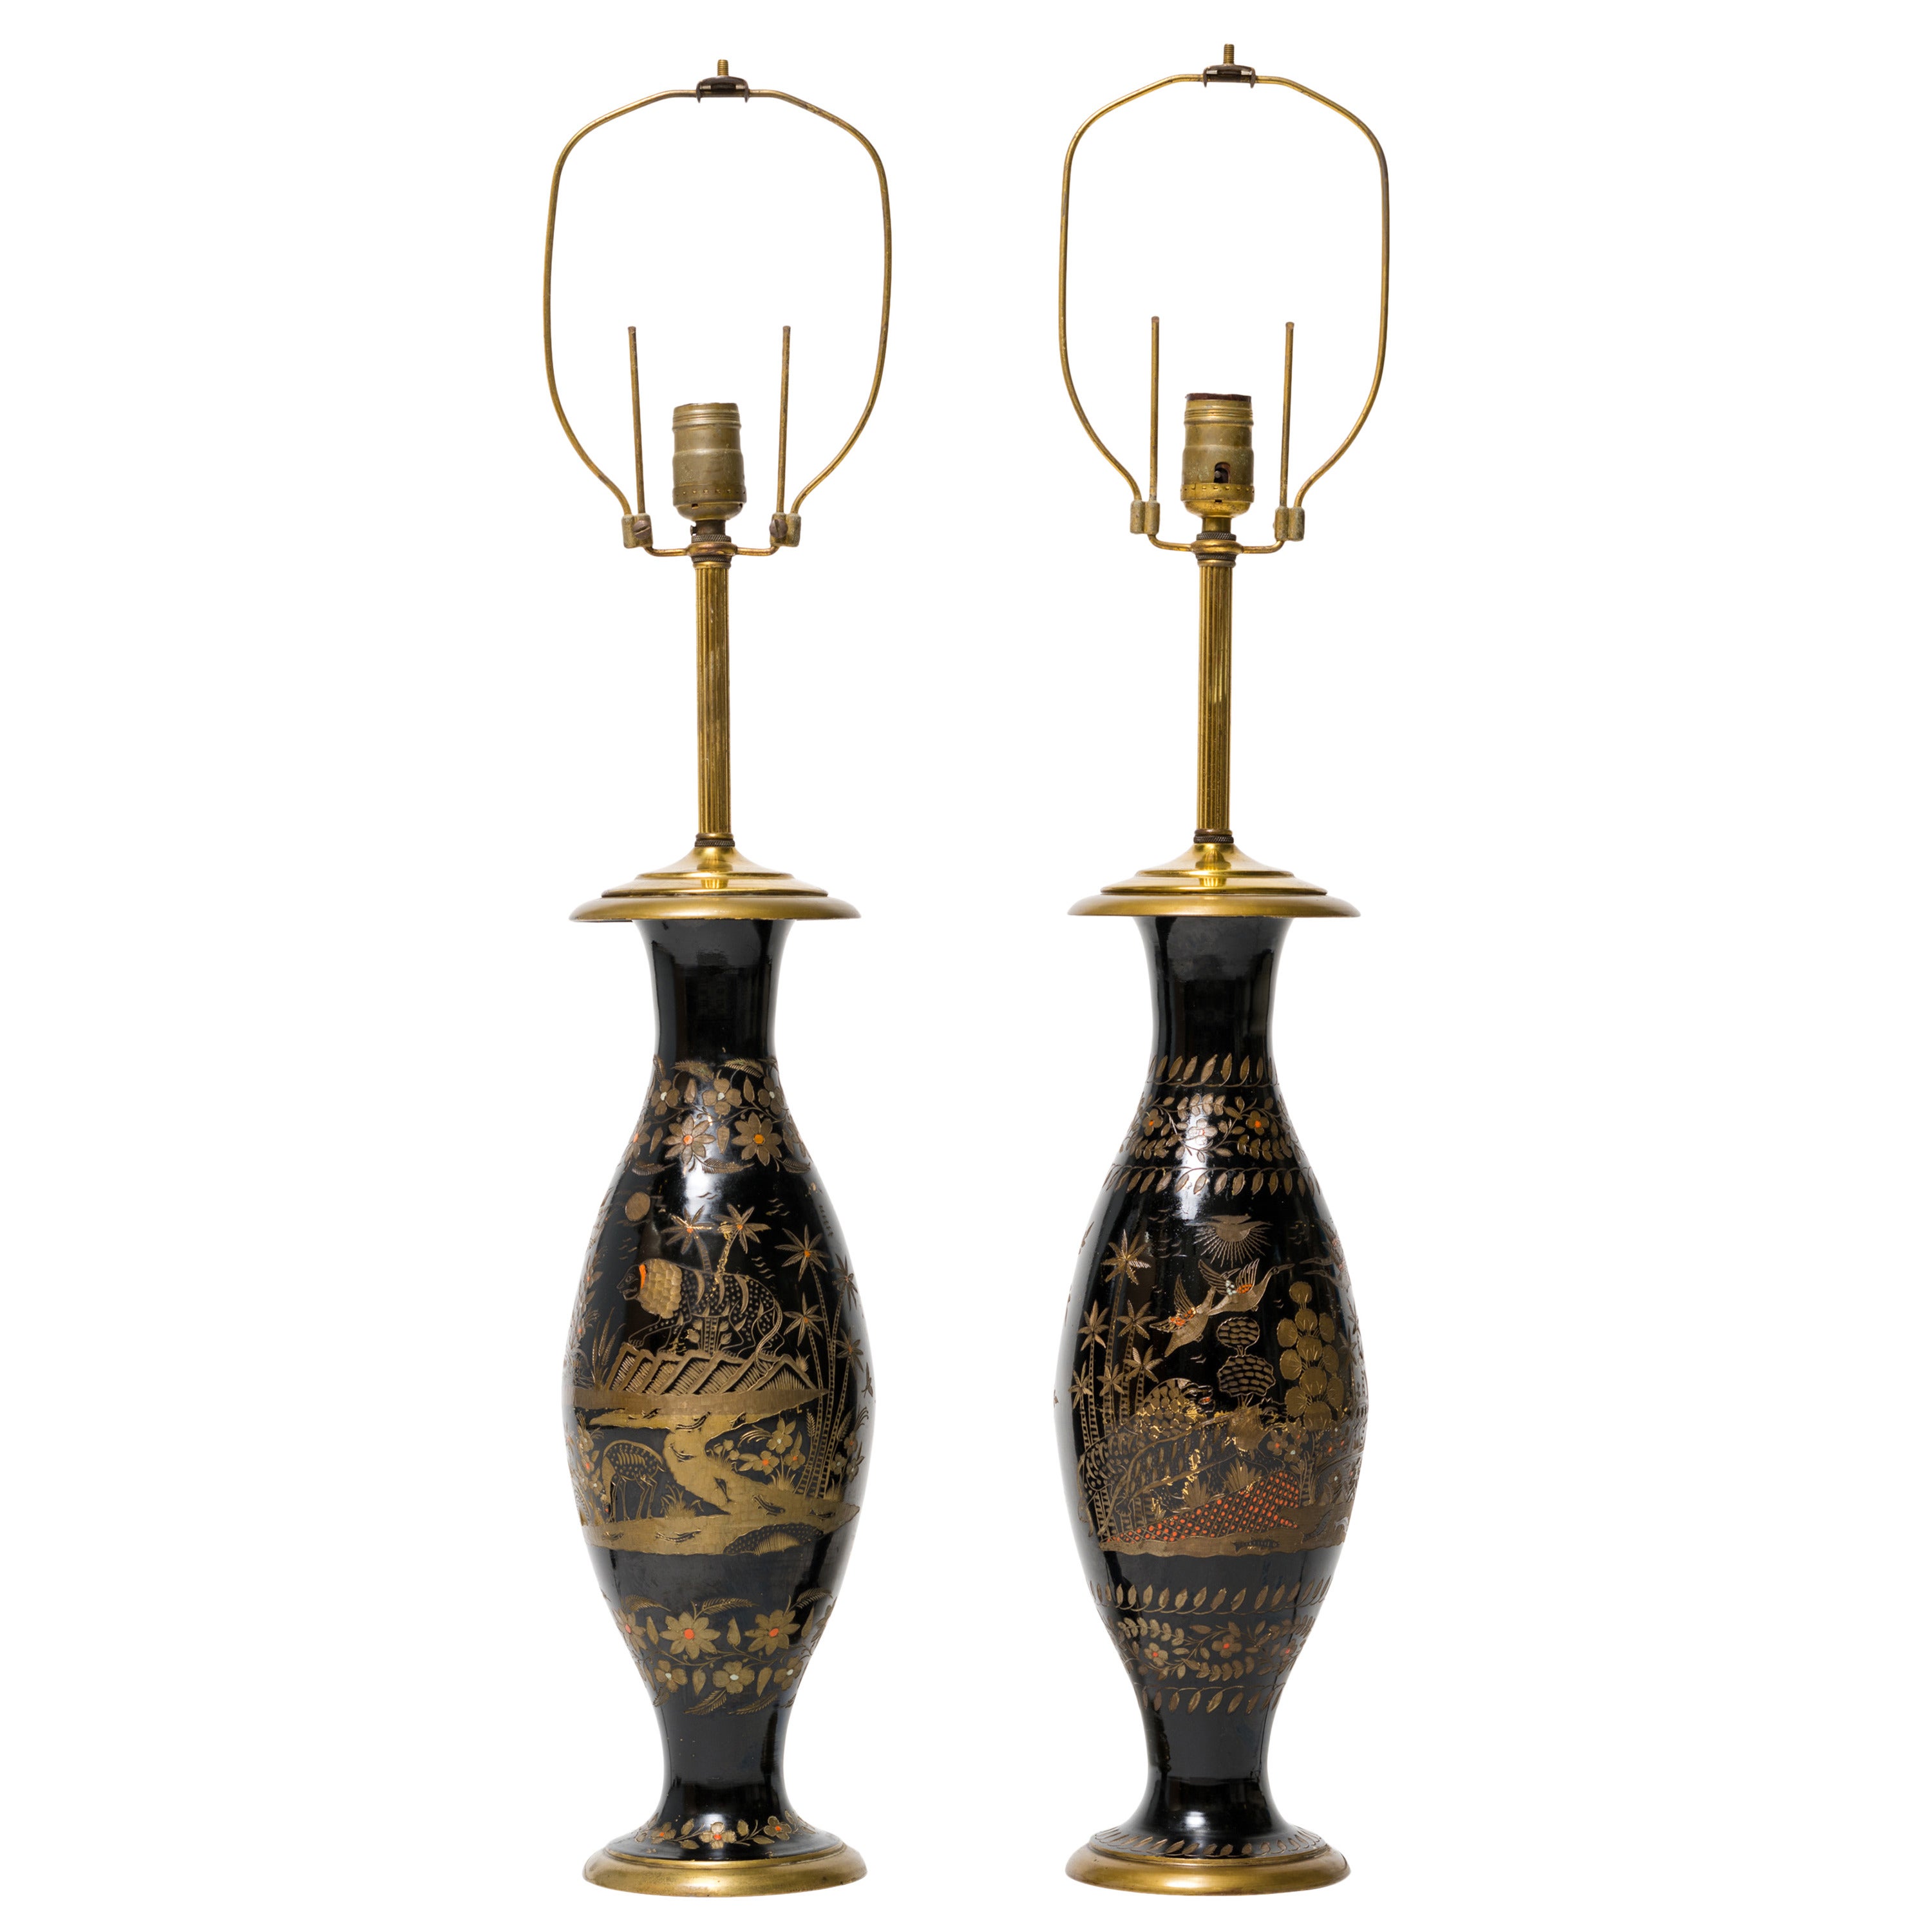 Pair of Brass Etched Asian Motif Table Lamps